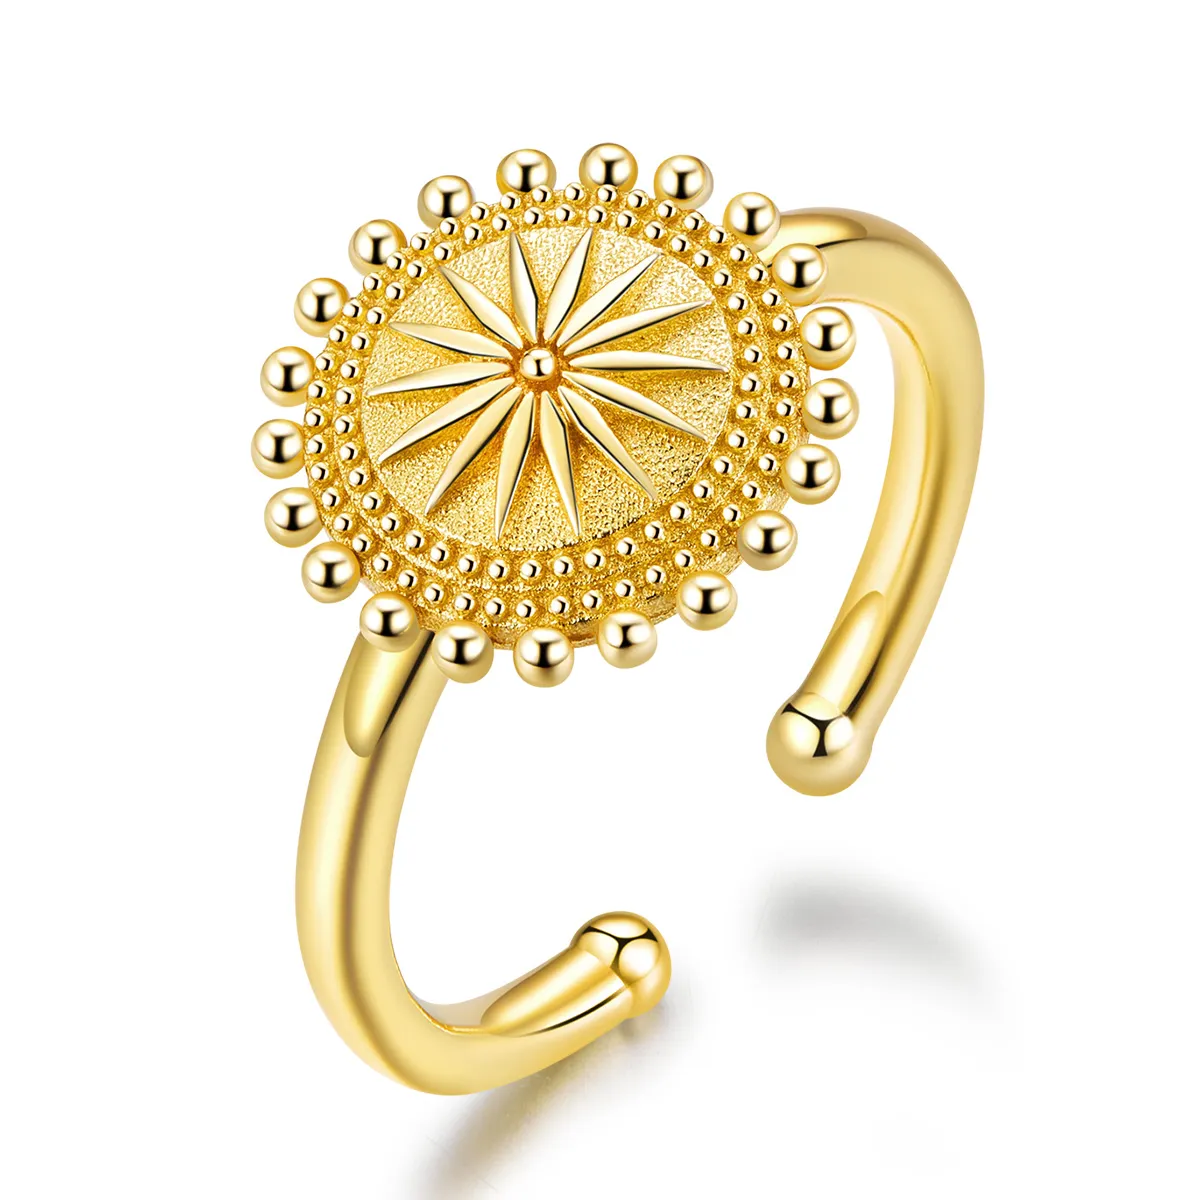 Pandora Style 18ct Gold Plated Starry Open Ring - SCR580